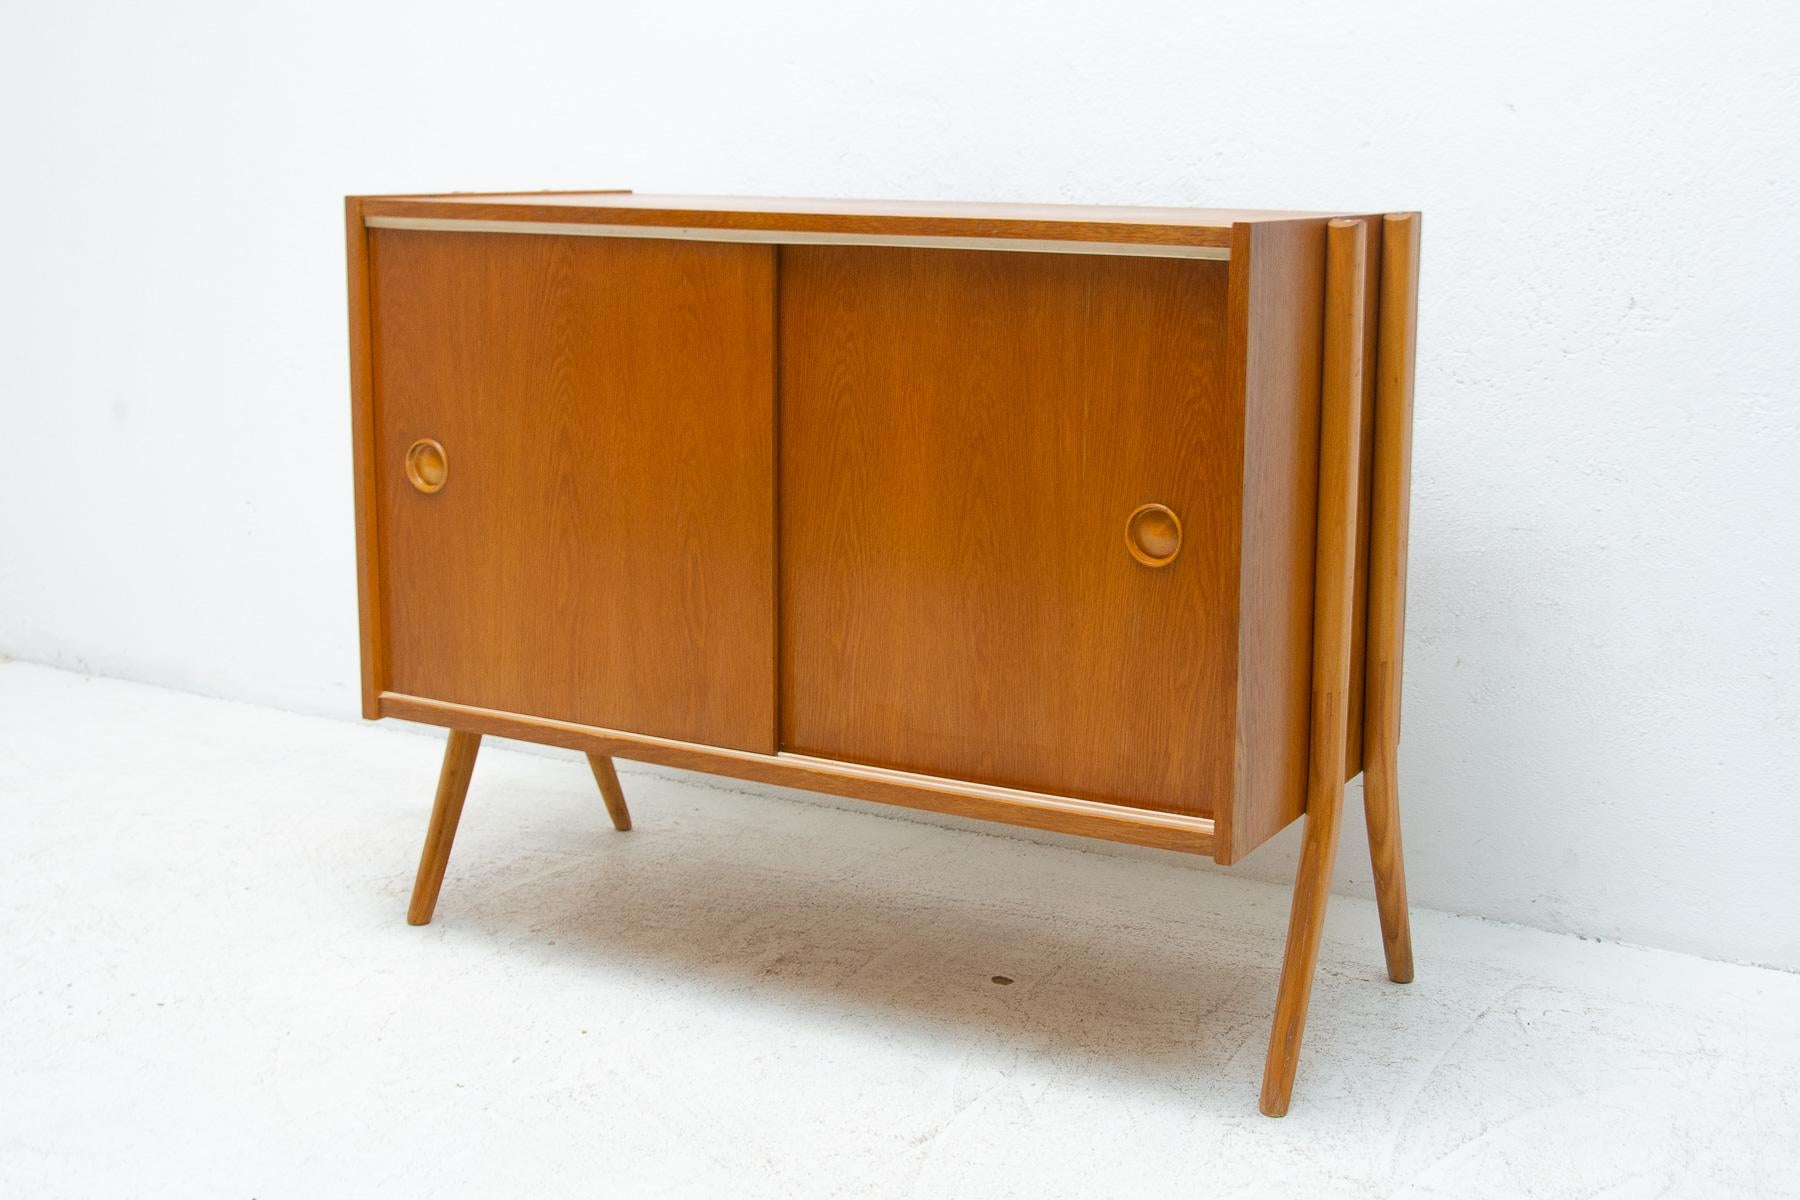 Mid century sideboard or chest of drawers. It features a sliding doors. It´s made of wood and plywood, veneered in a polished beech wood. It was produced by Zapadoslovenske Nabytkarske Zavody, a furniture company in Czechoslovakia in 1970´s. In very